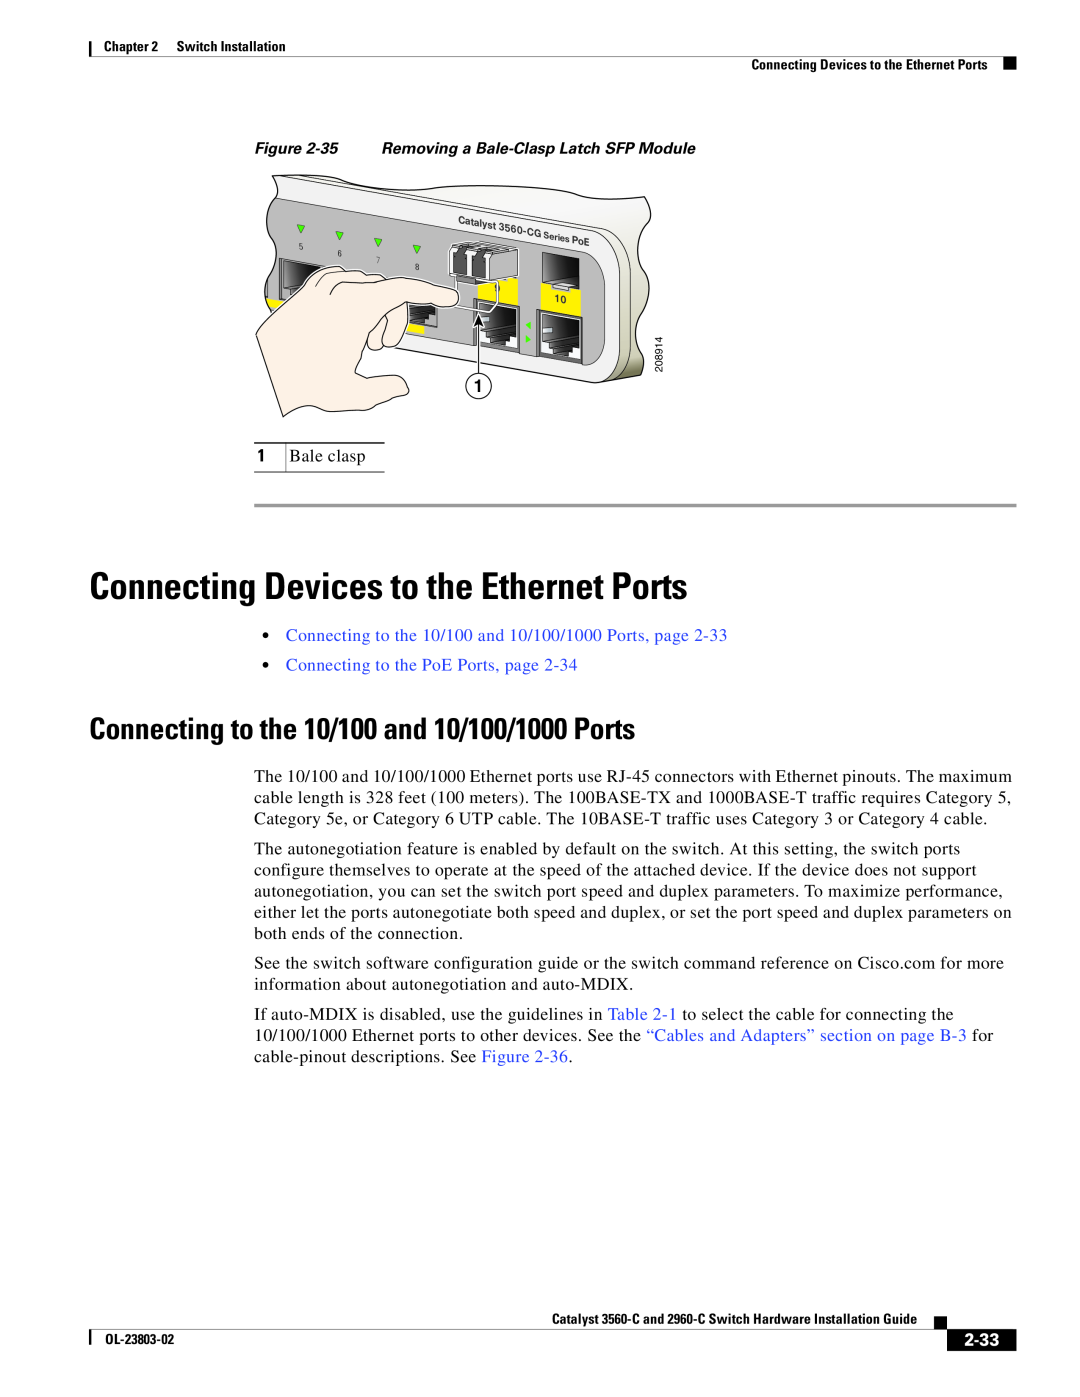 Cisco Systems N55M4Q manual Connecting Devices to the Ethernet Ports, Connecting to the 10/100 and 10/100/1000 Ports, 2-33 